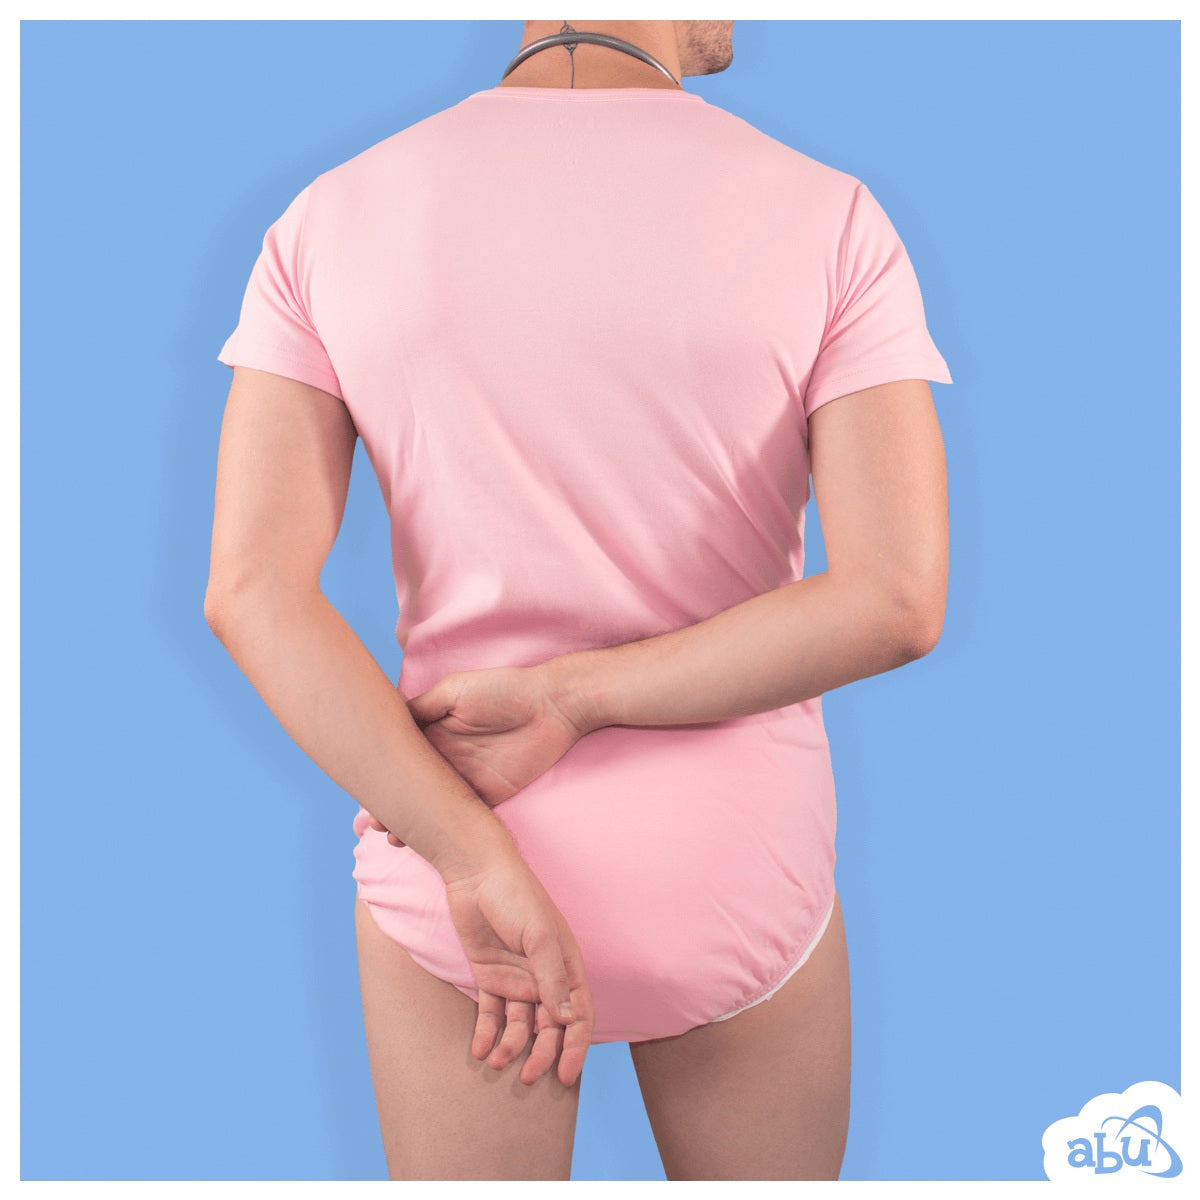 Rear view of model wearing baby pink diapersuit with disposable diaper worn underneath